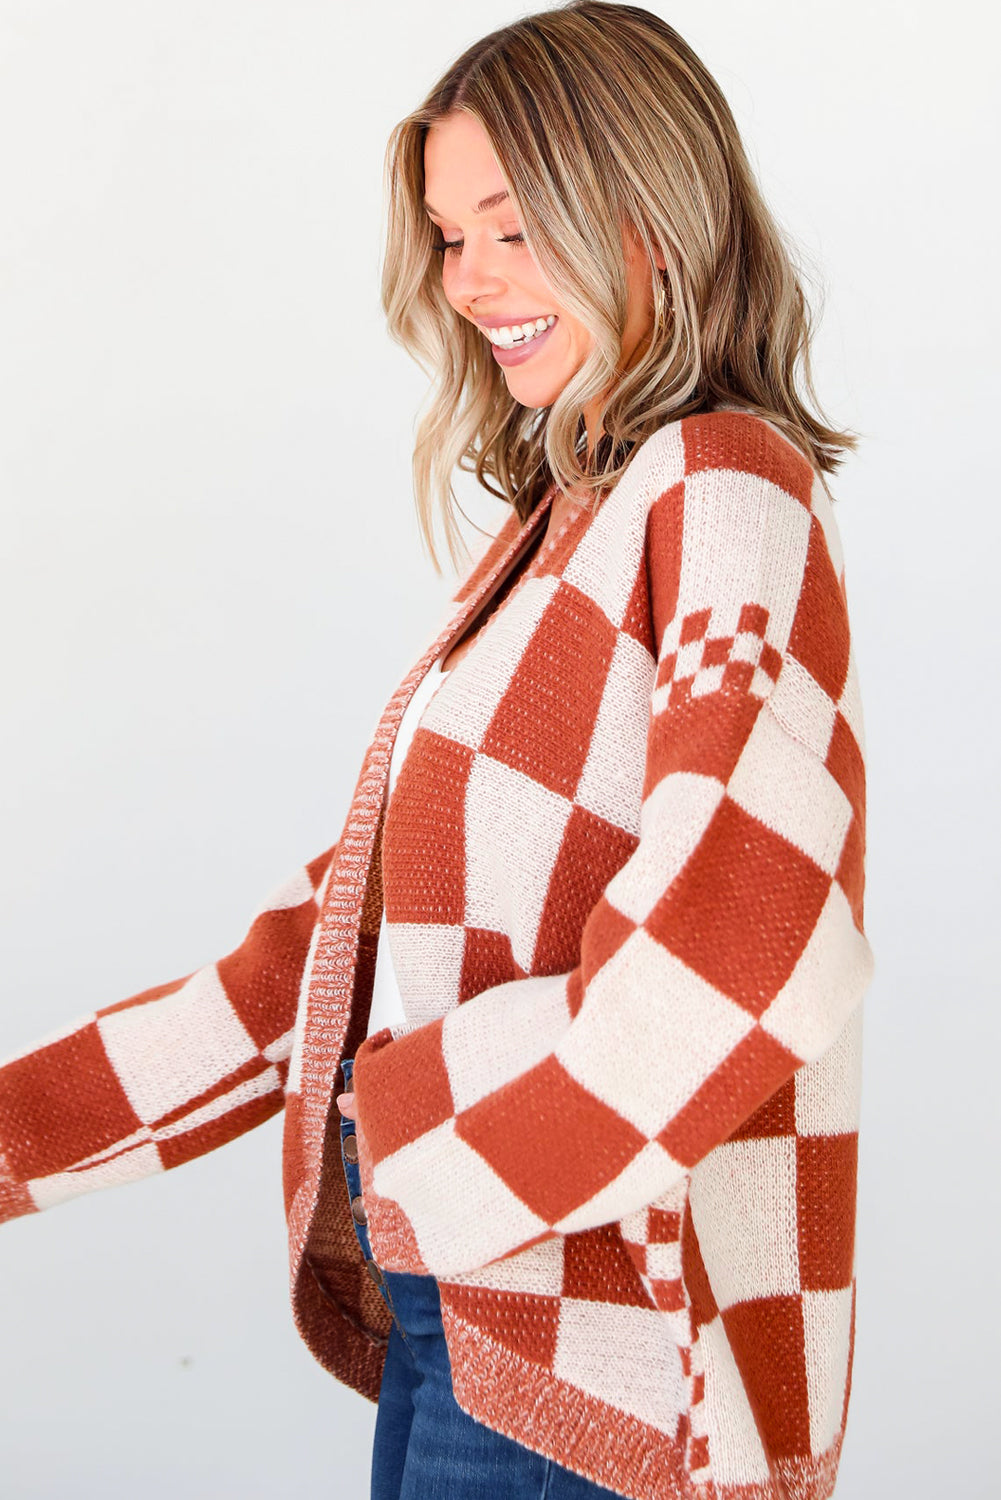 Chestnut Mix Checkered Open Front Knit Cardigan